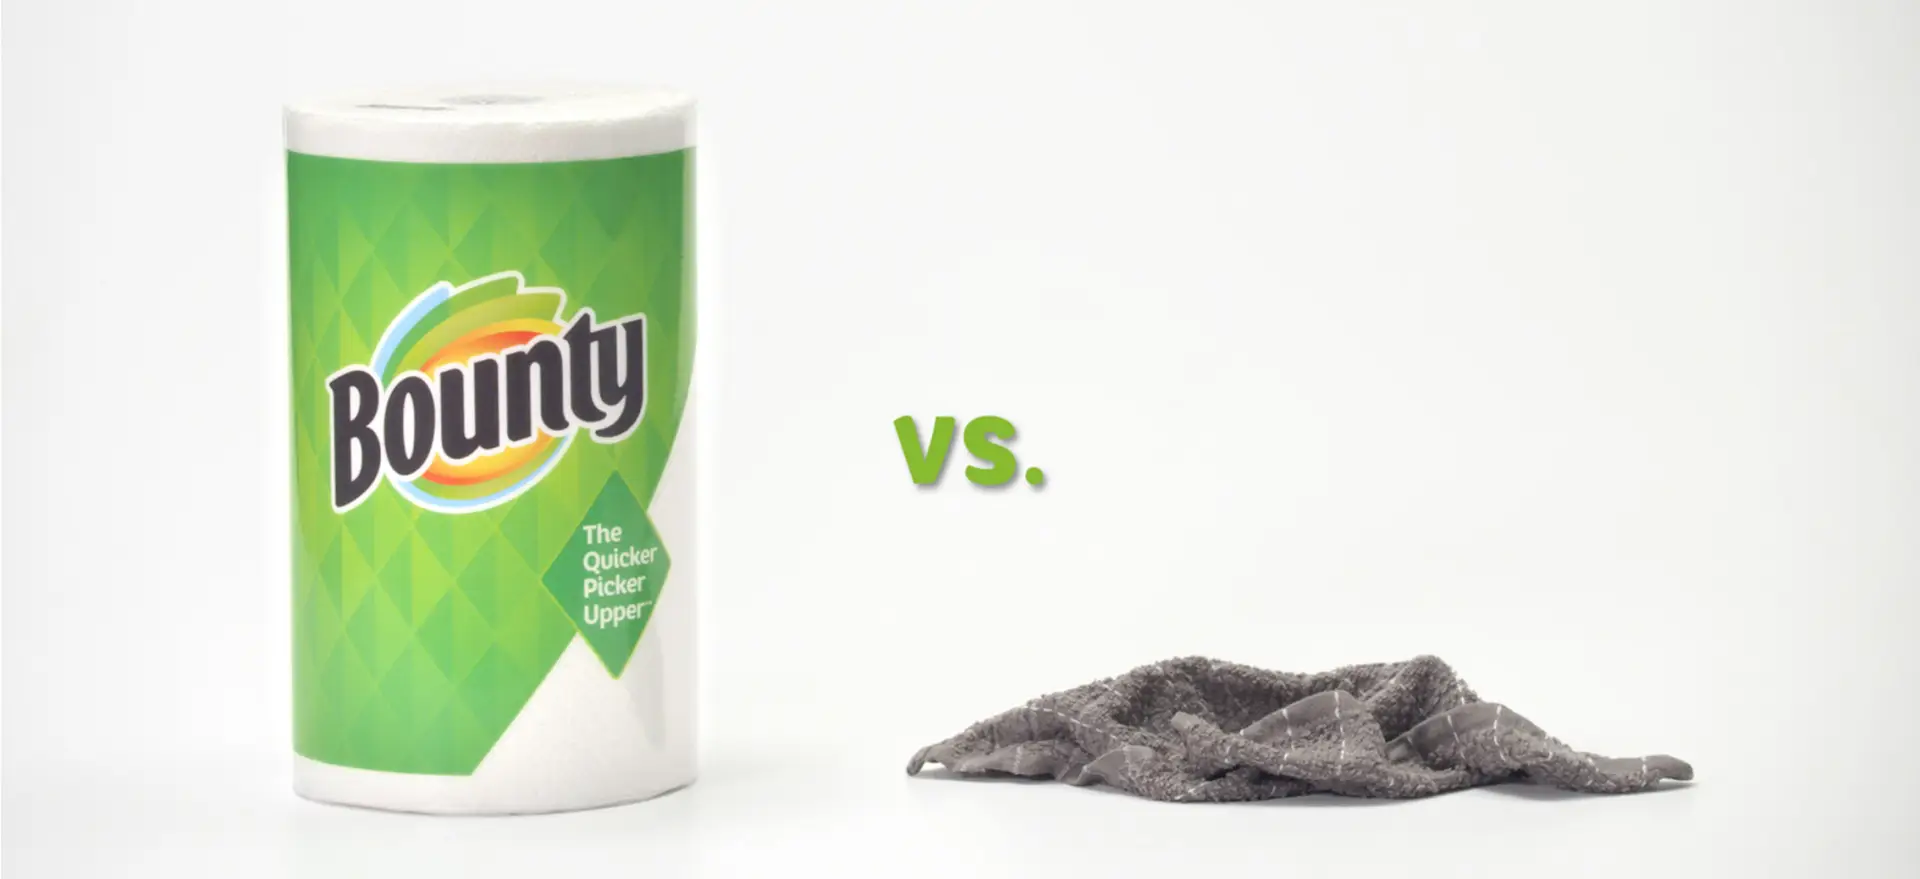 Why Hand Hygiene Is Better With Bounty